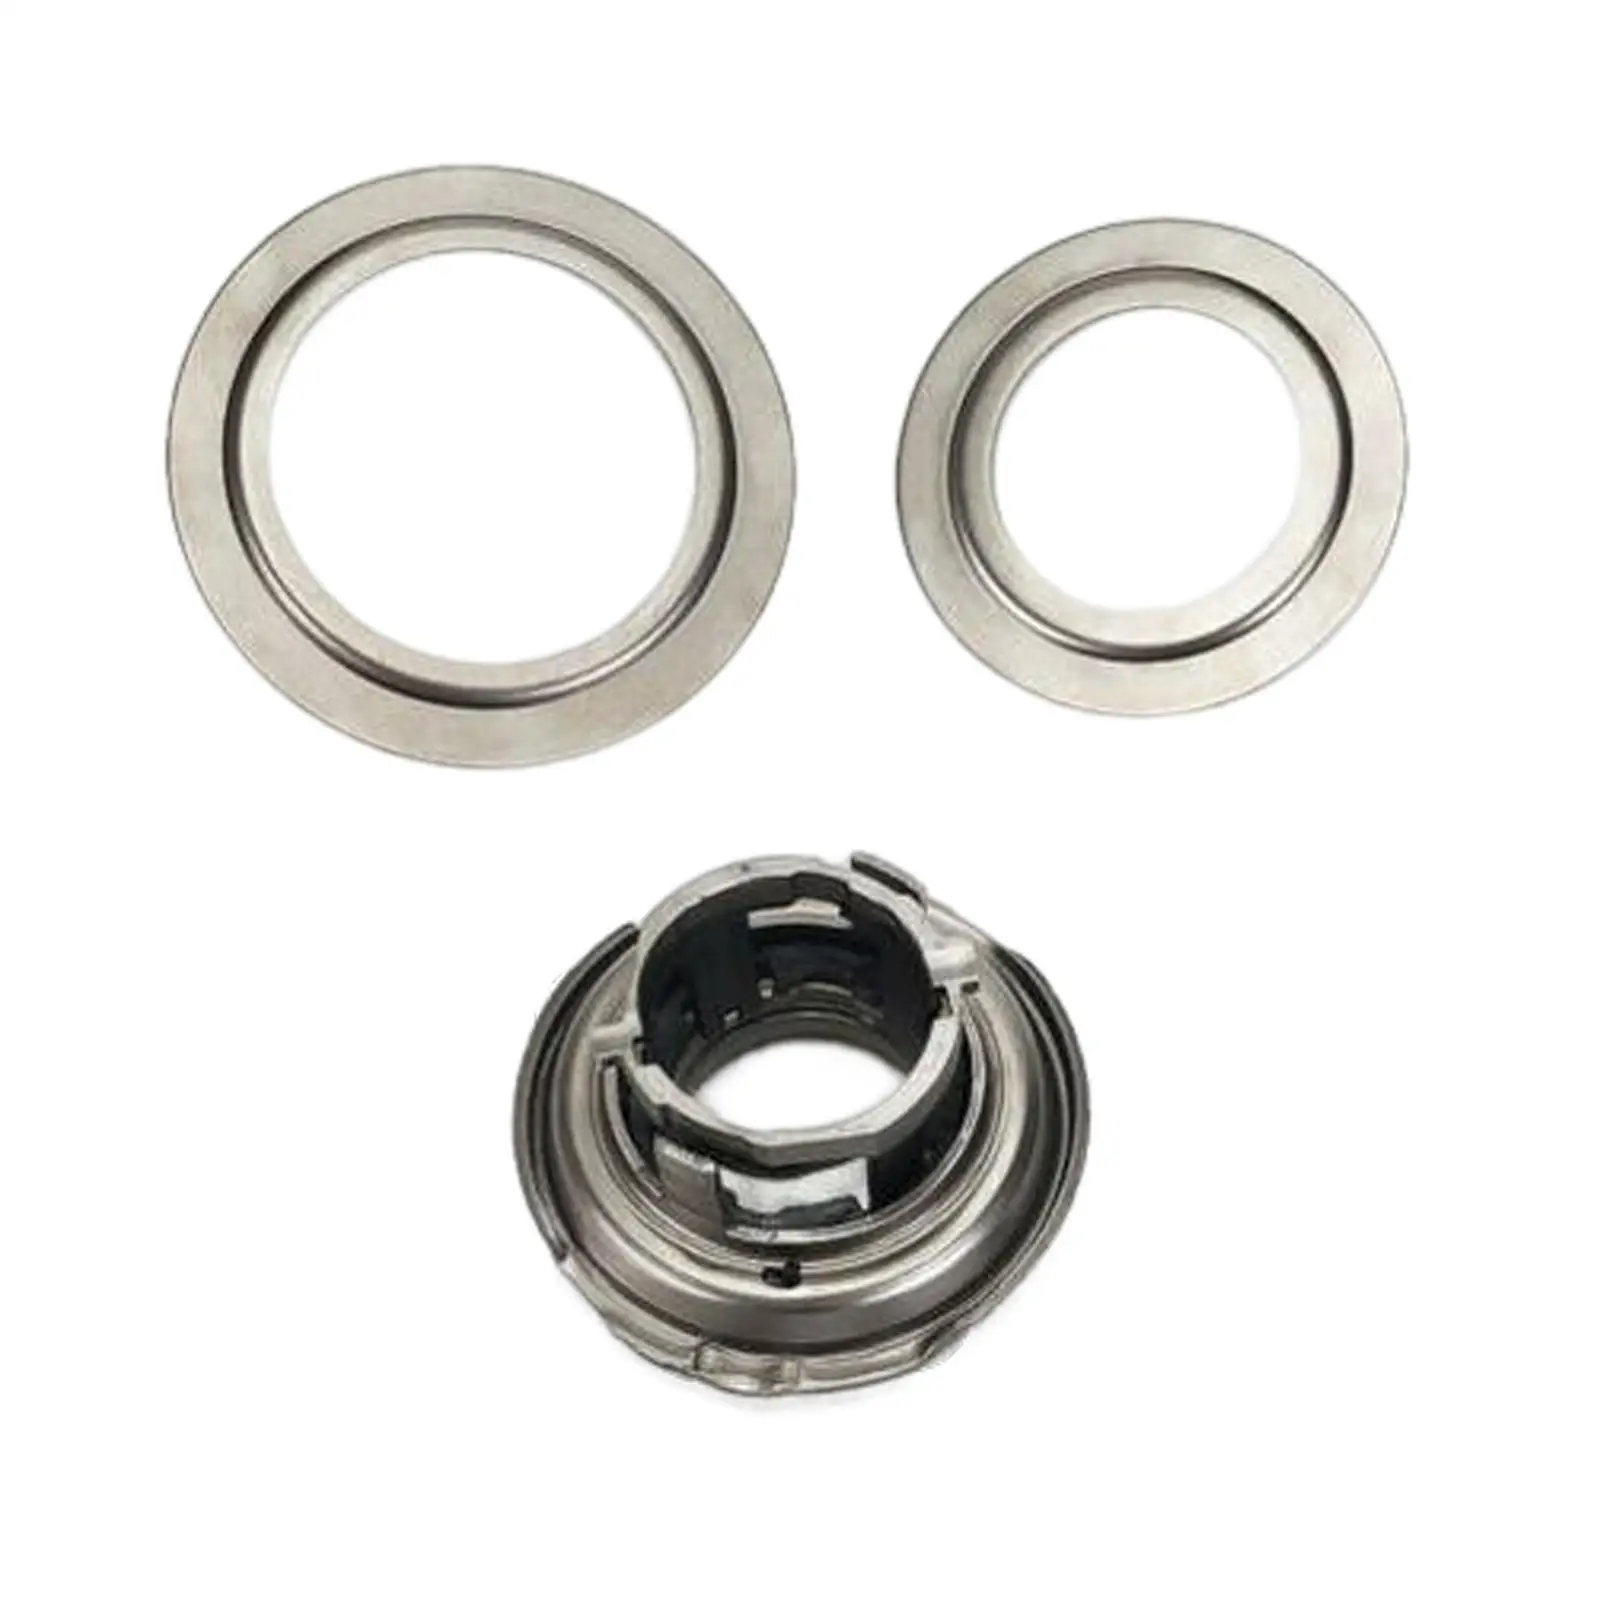 Auto Transmission Bearing Kit 6Dct250 Dps6 Replacement Fit for Ford Focus 